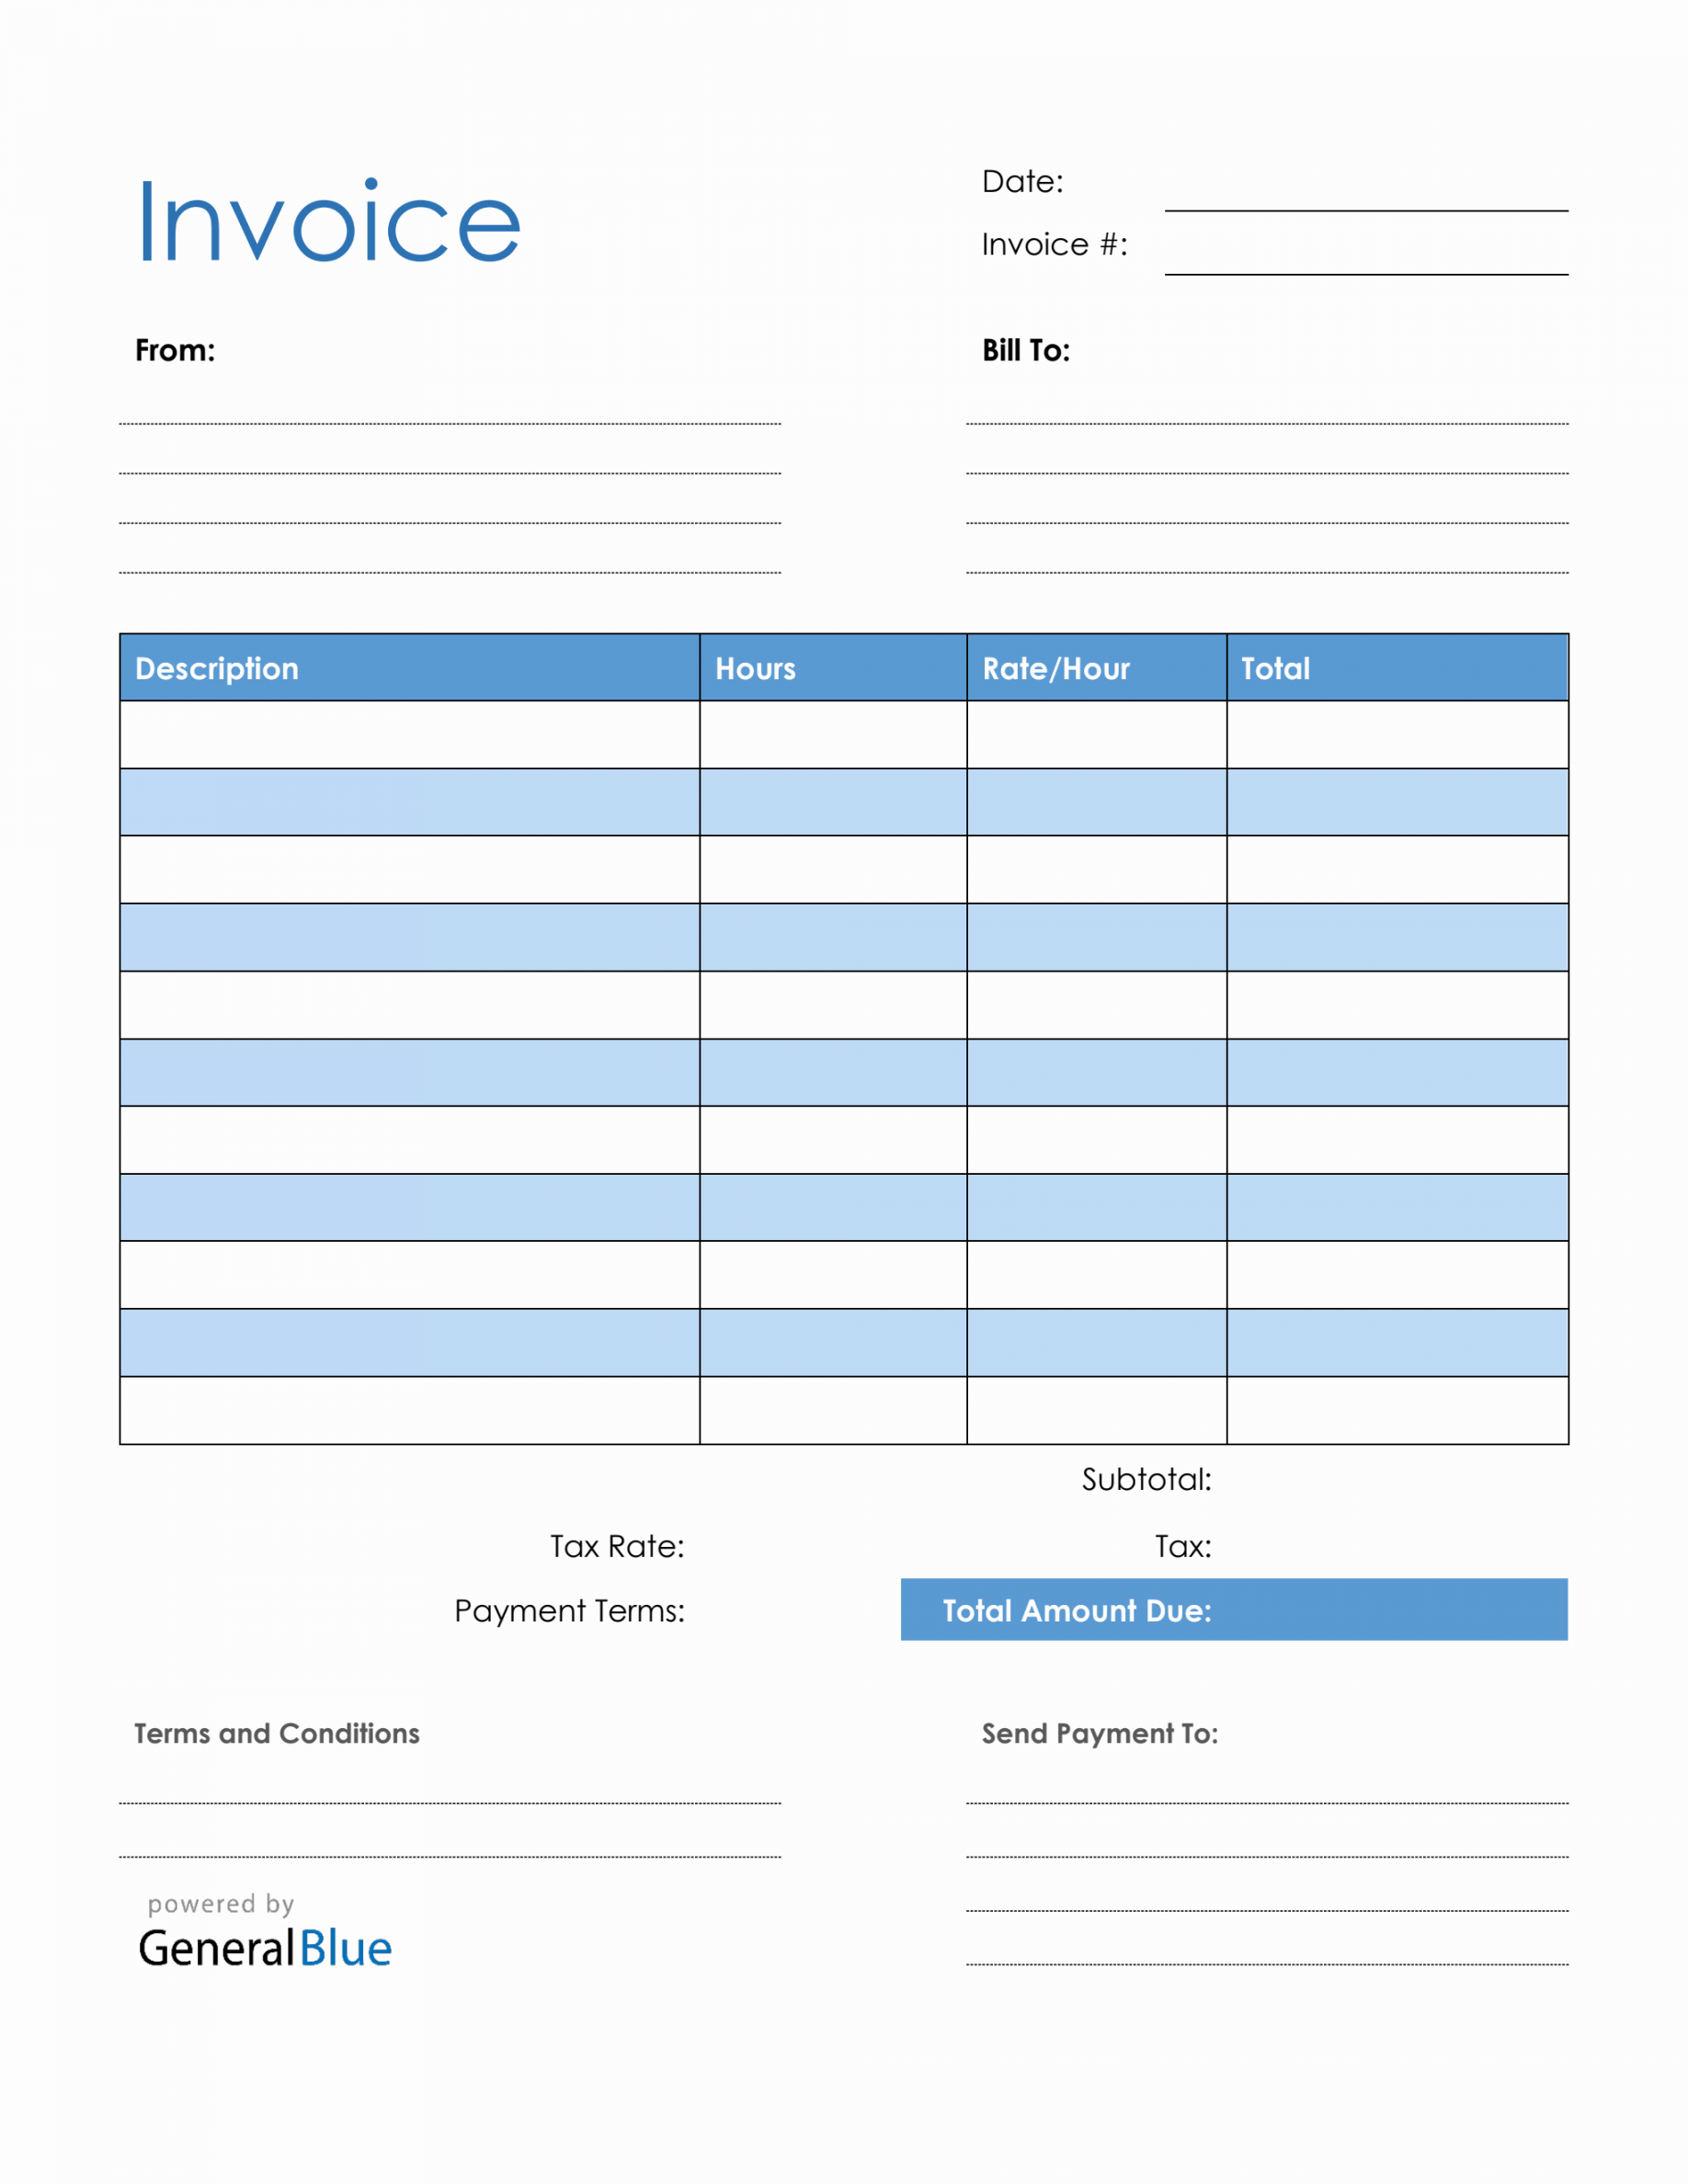 Free Printable Invoice Templates - Printable - Blank Invoice Template in PDF Blue